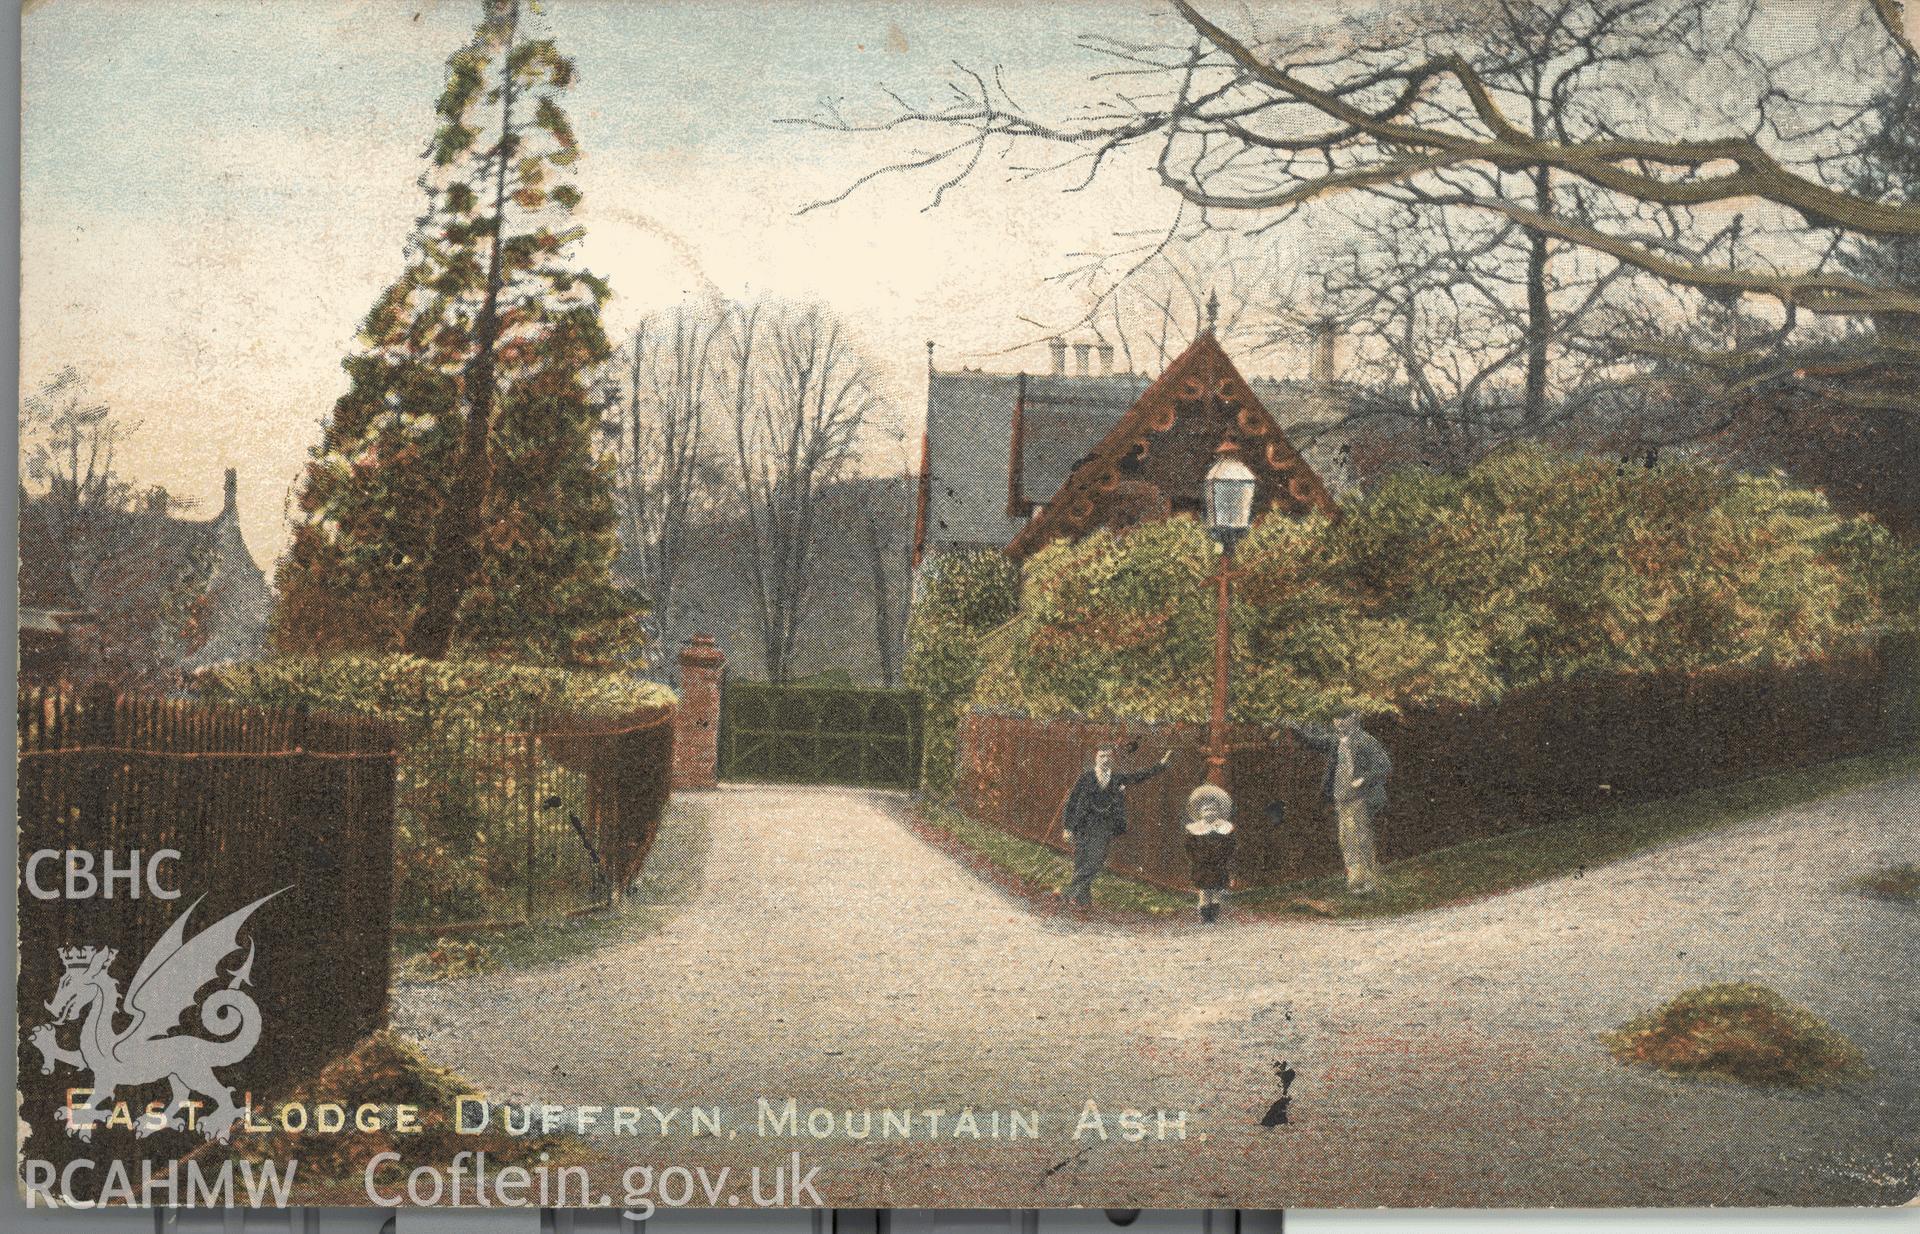 Digitised postcard image of east lodge at Dyffryn House, Mountain Ash, with figures, Meredith, Mountain Ash. Produced by Parks and Gardens Data Services, from an original item in the Peter Davis Collection at Parks and Gardens UK. We hold only web-resolution images of this collection, suitable for viewing on screen and for research purposes only. We do not hold the original images, or publication quality scans.